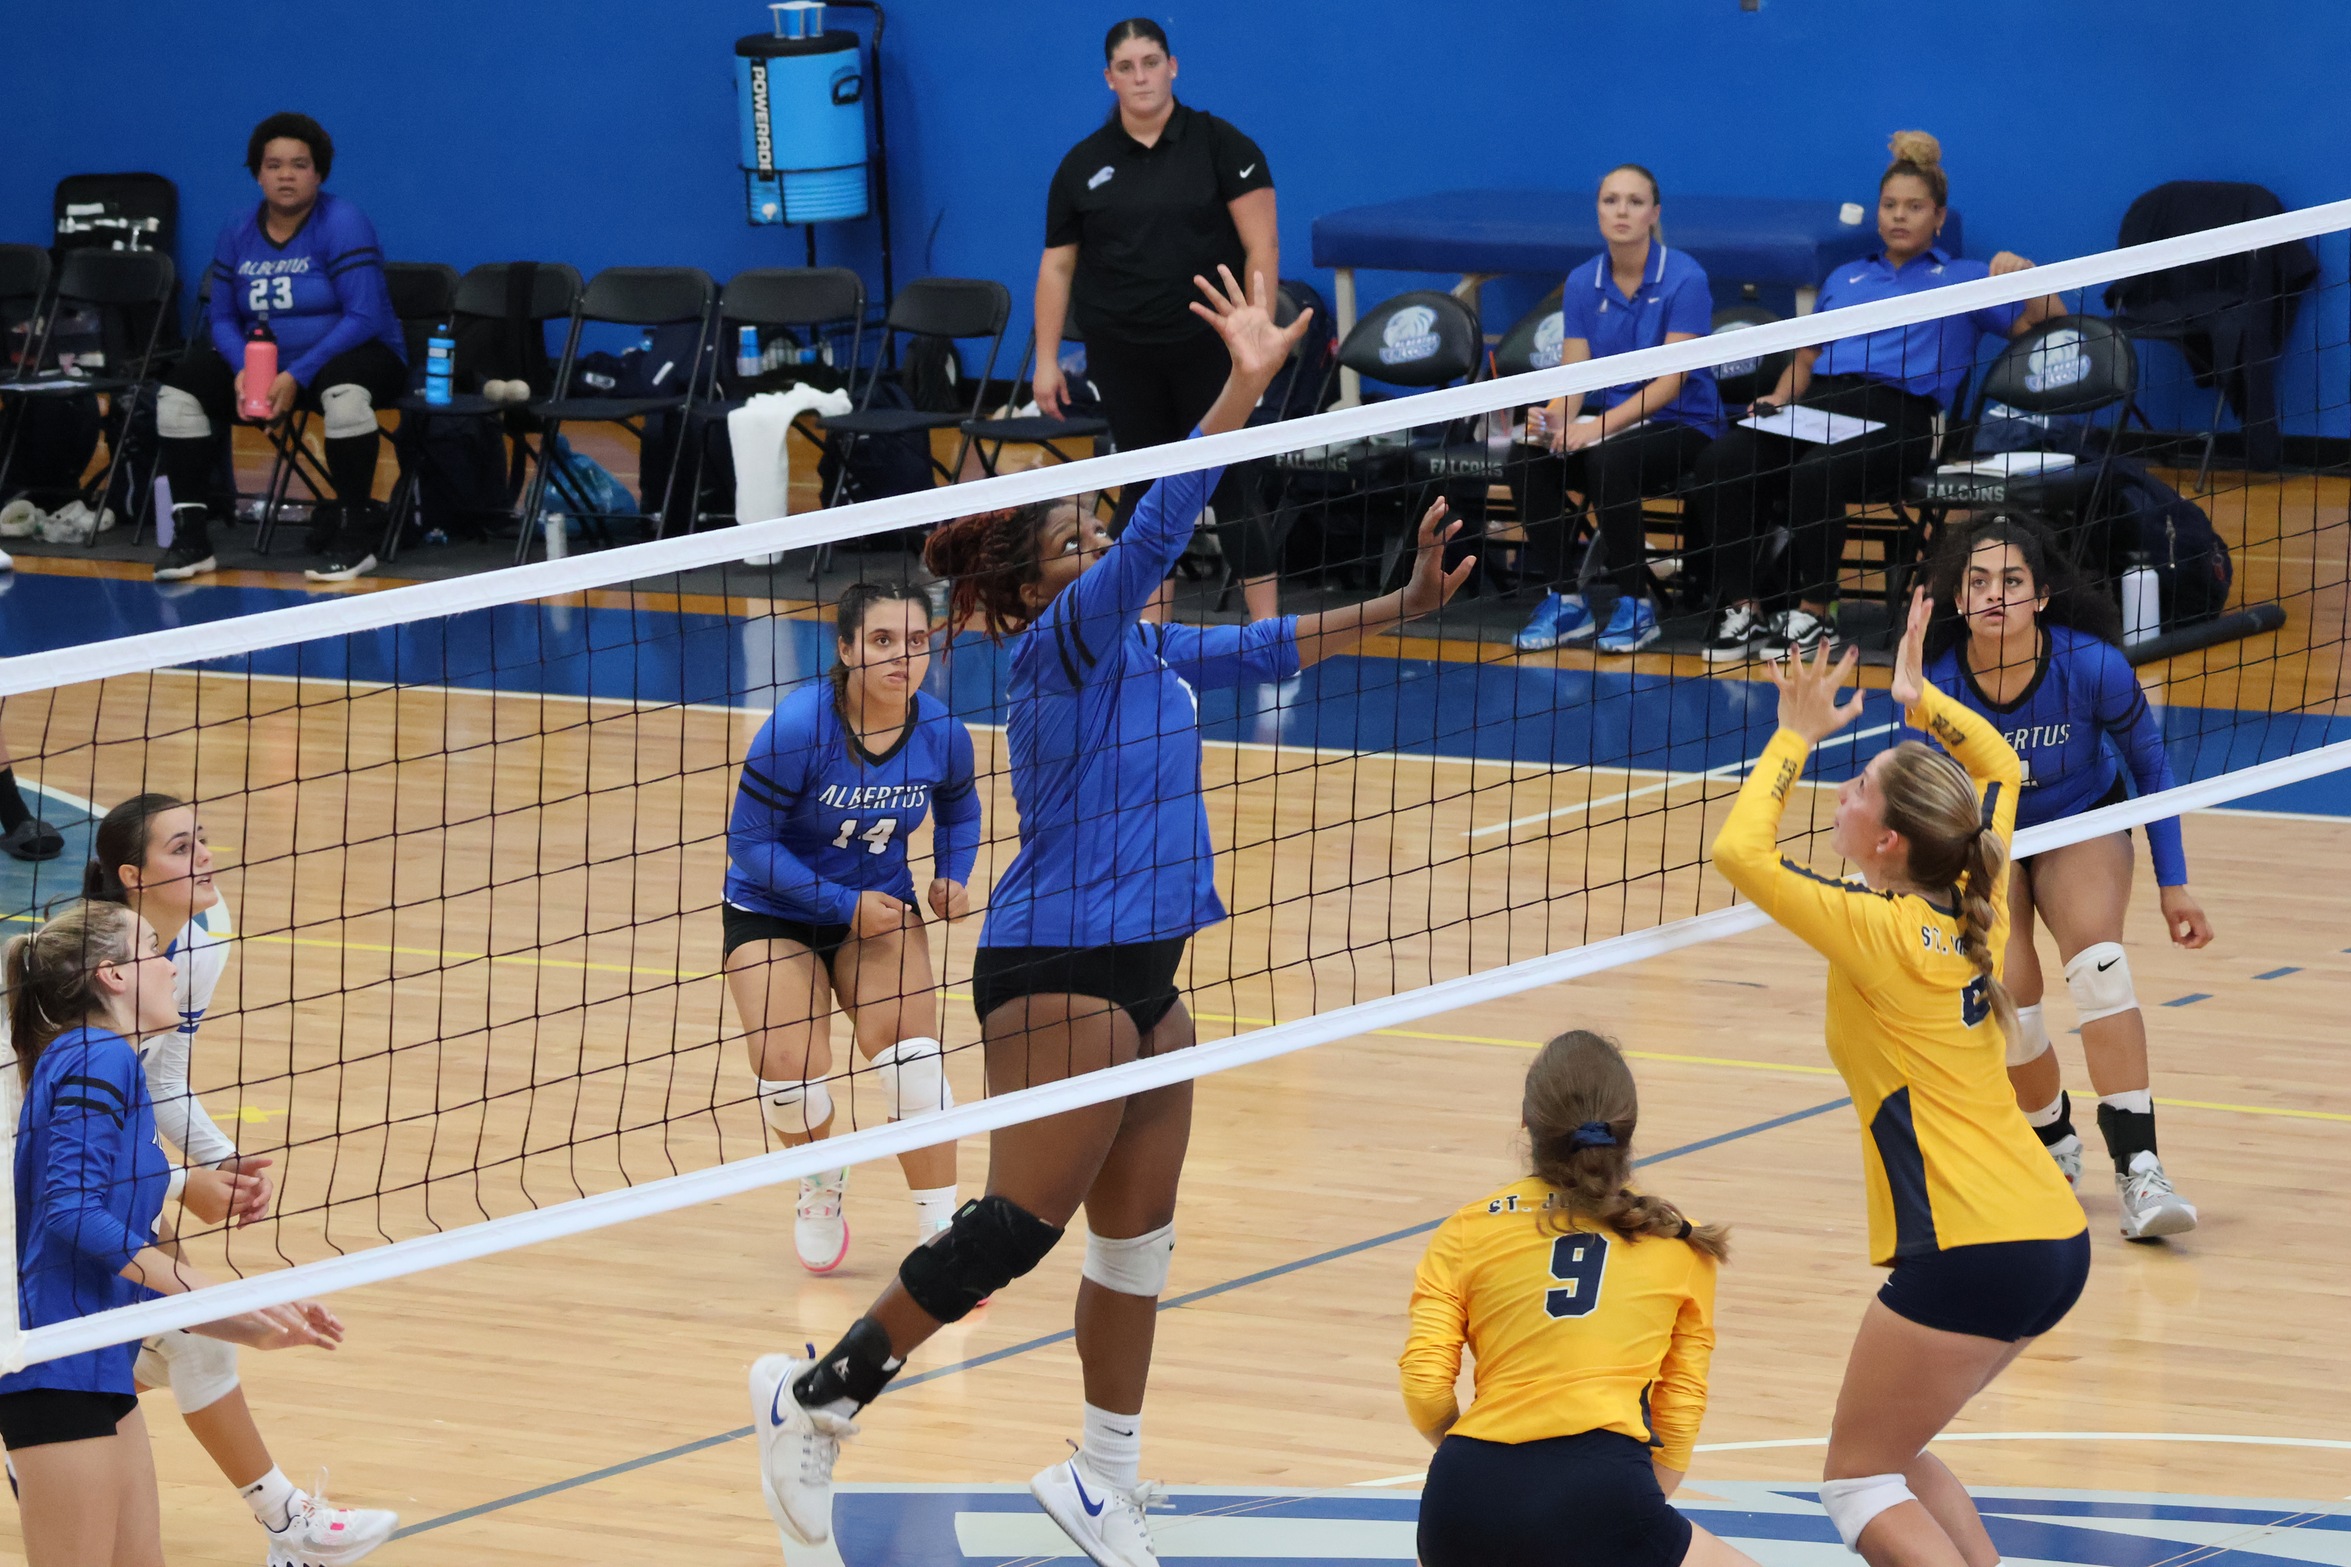 Women's Volleyball Swept In Doubleheader Against Curry And Saint Joseph's (L.I.)